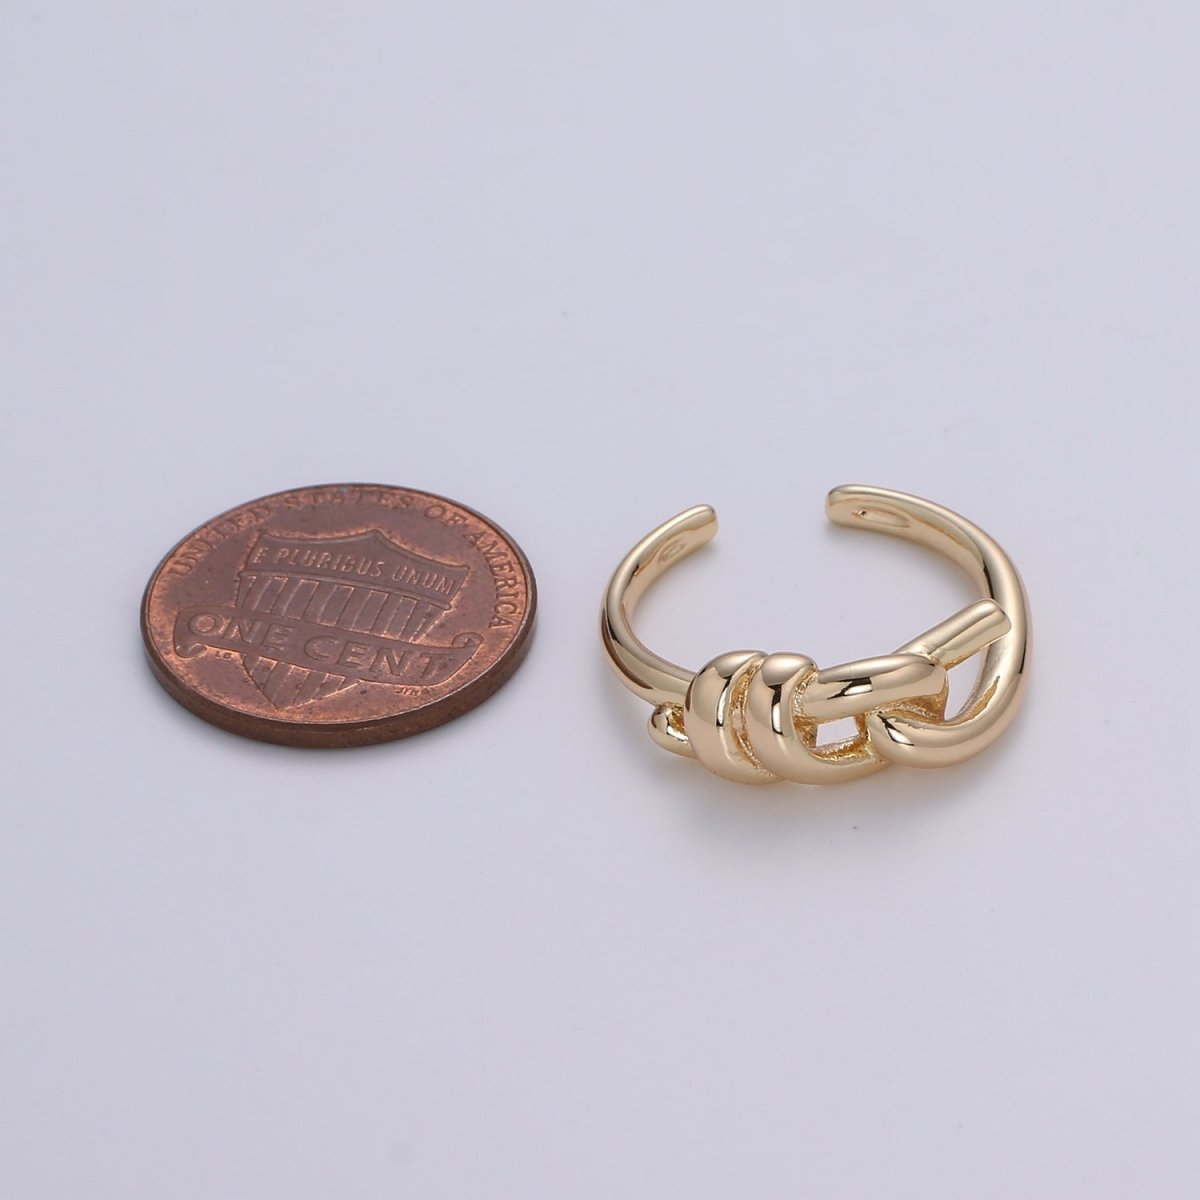 Gold Knot Ring, Tie The Knot Ring, Love Knot Ring, Dainty Gold Filled Knot Ring, Twisted Gold Minimalist Ring O-313 - DLUXCA